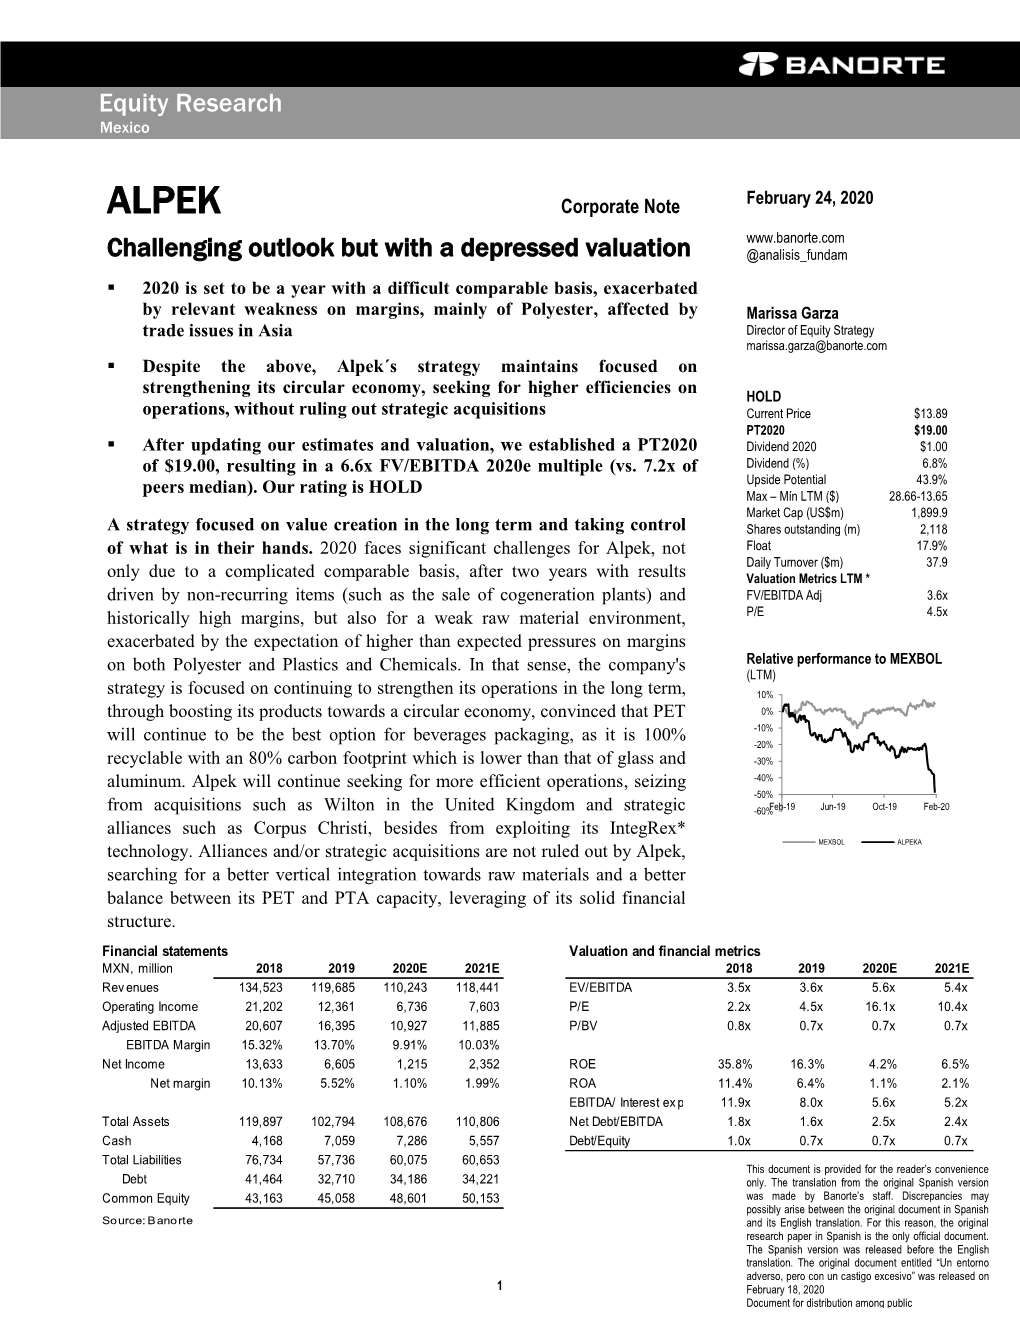 ALPEK Challenging Outlook but with a Depressed Valuation @Analisis Fundam